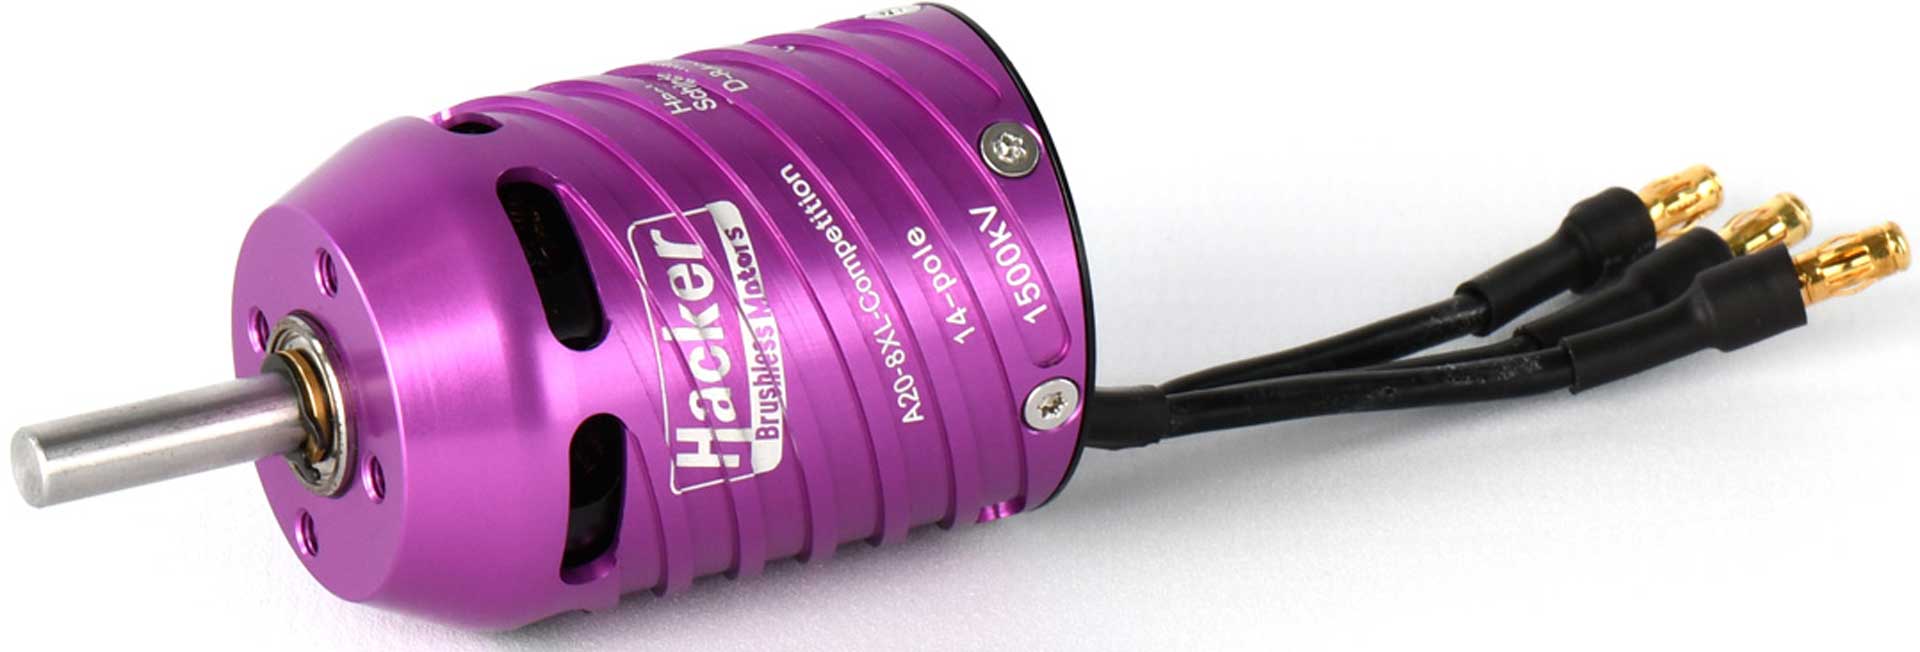 HACKER A20-8 XL Competition kv1500 Brushless Motor